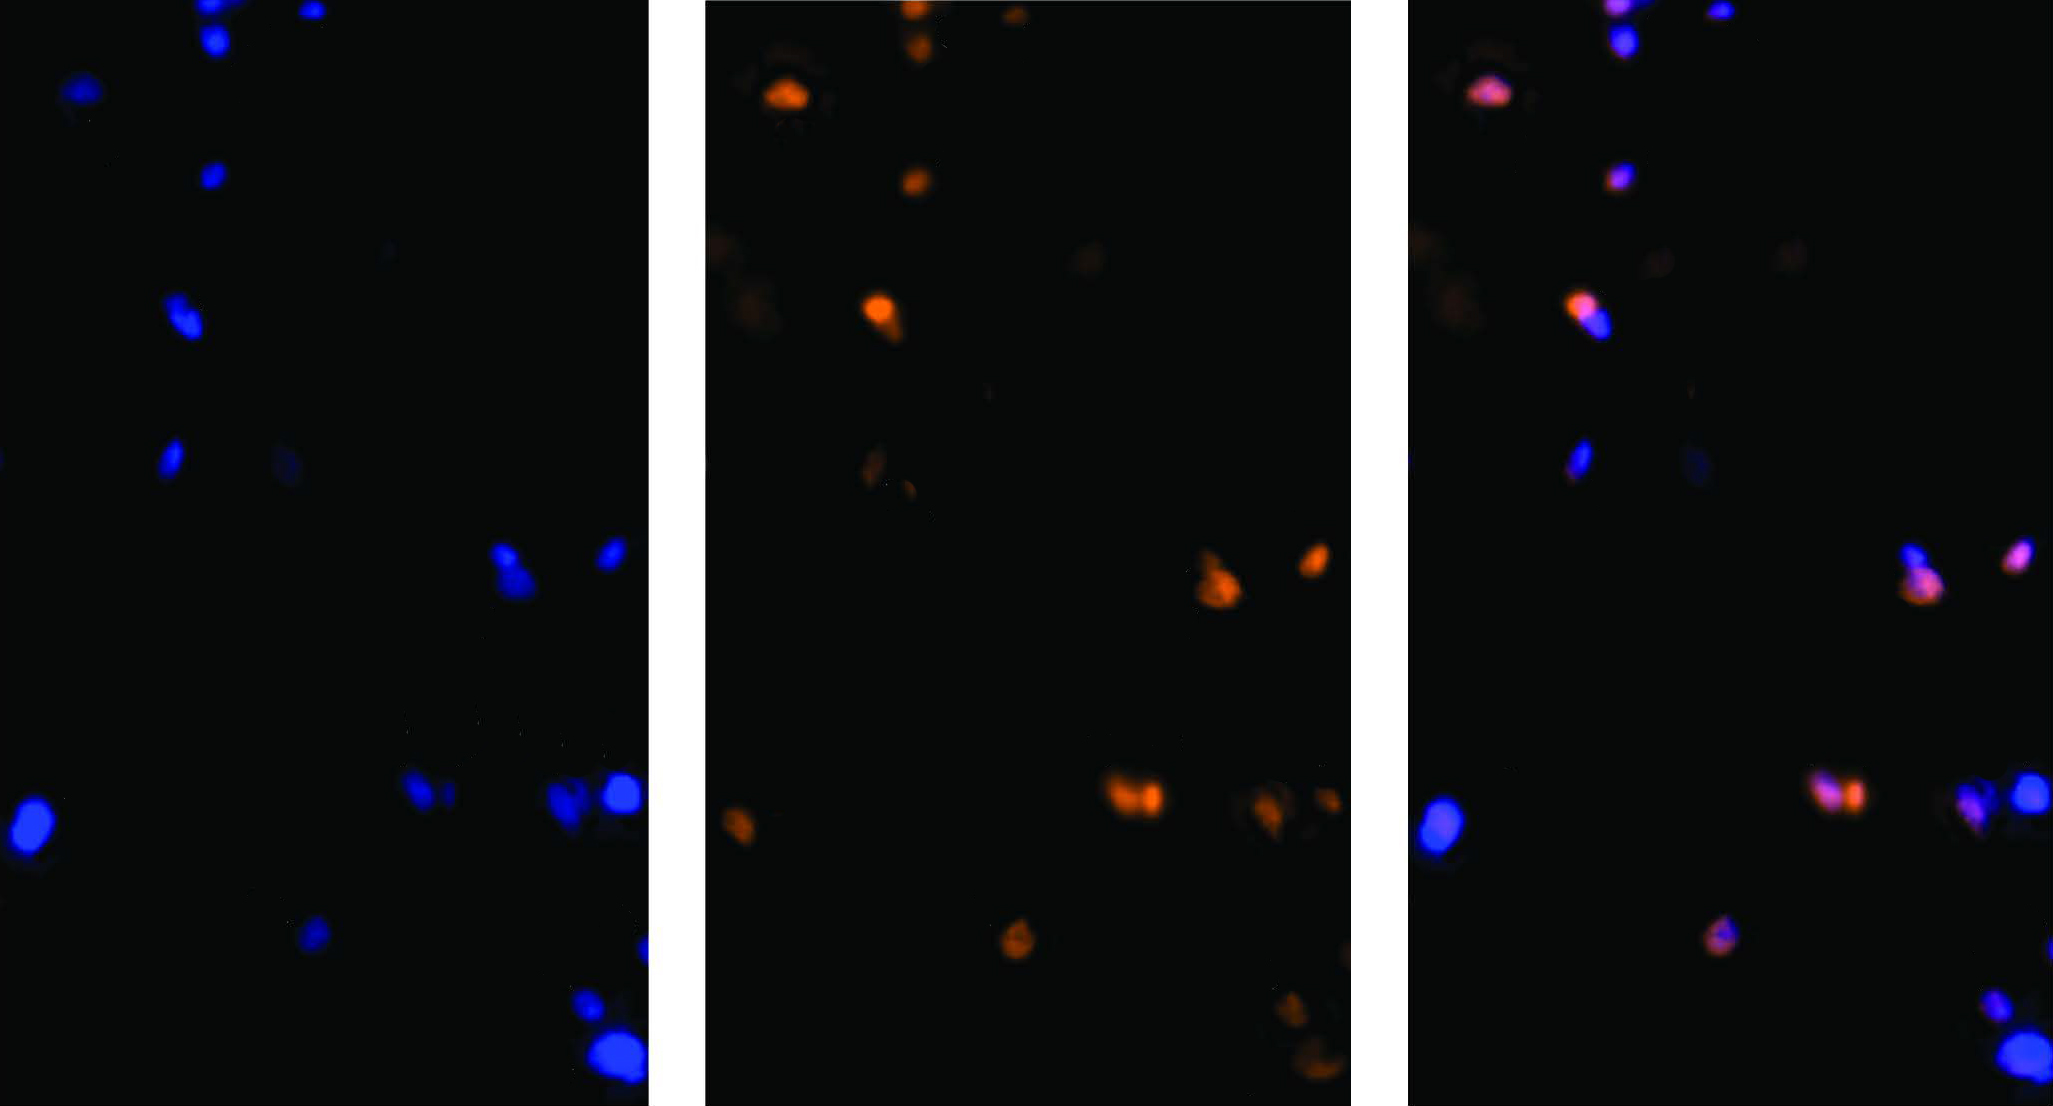 By staining the nuclei from all cells blue (left) and those from neurons red (middle), researchers can isolate the resulting purple nuclei from neurons (right).